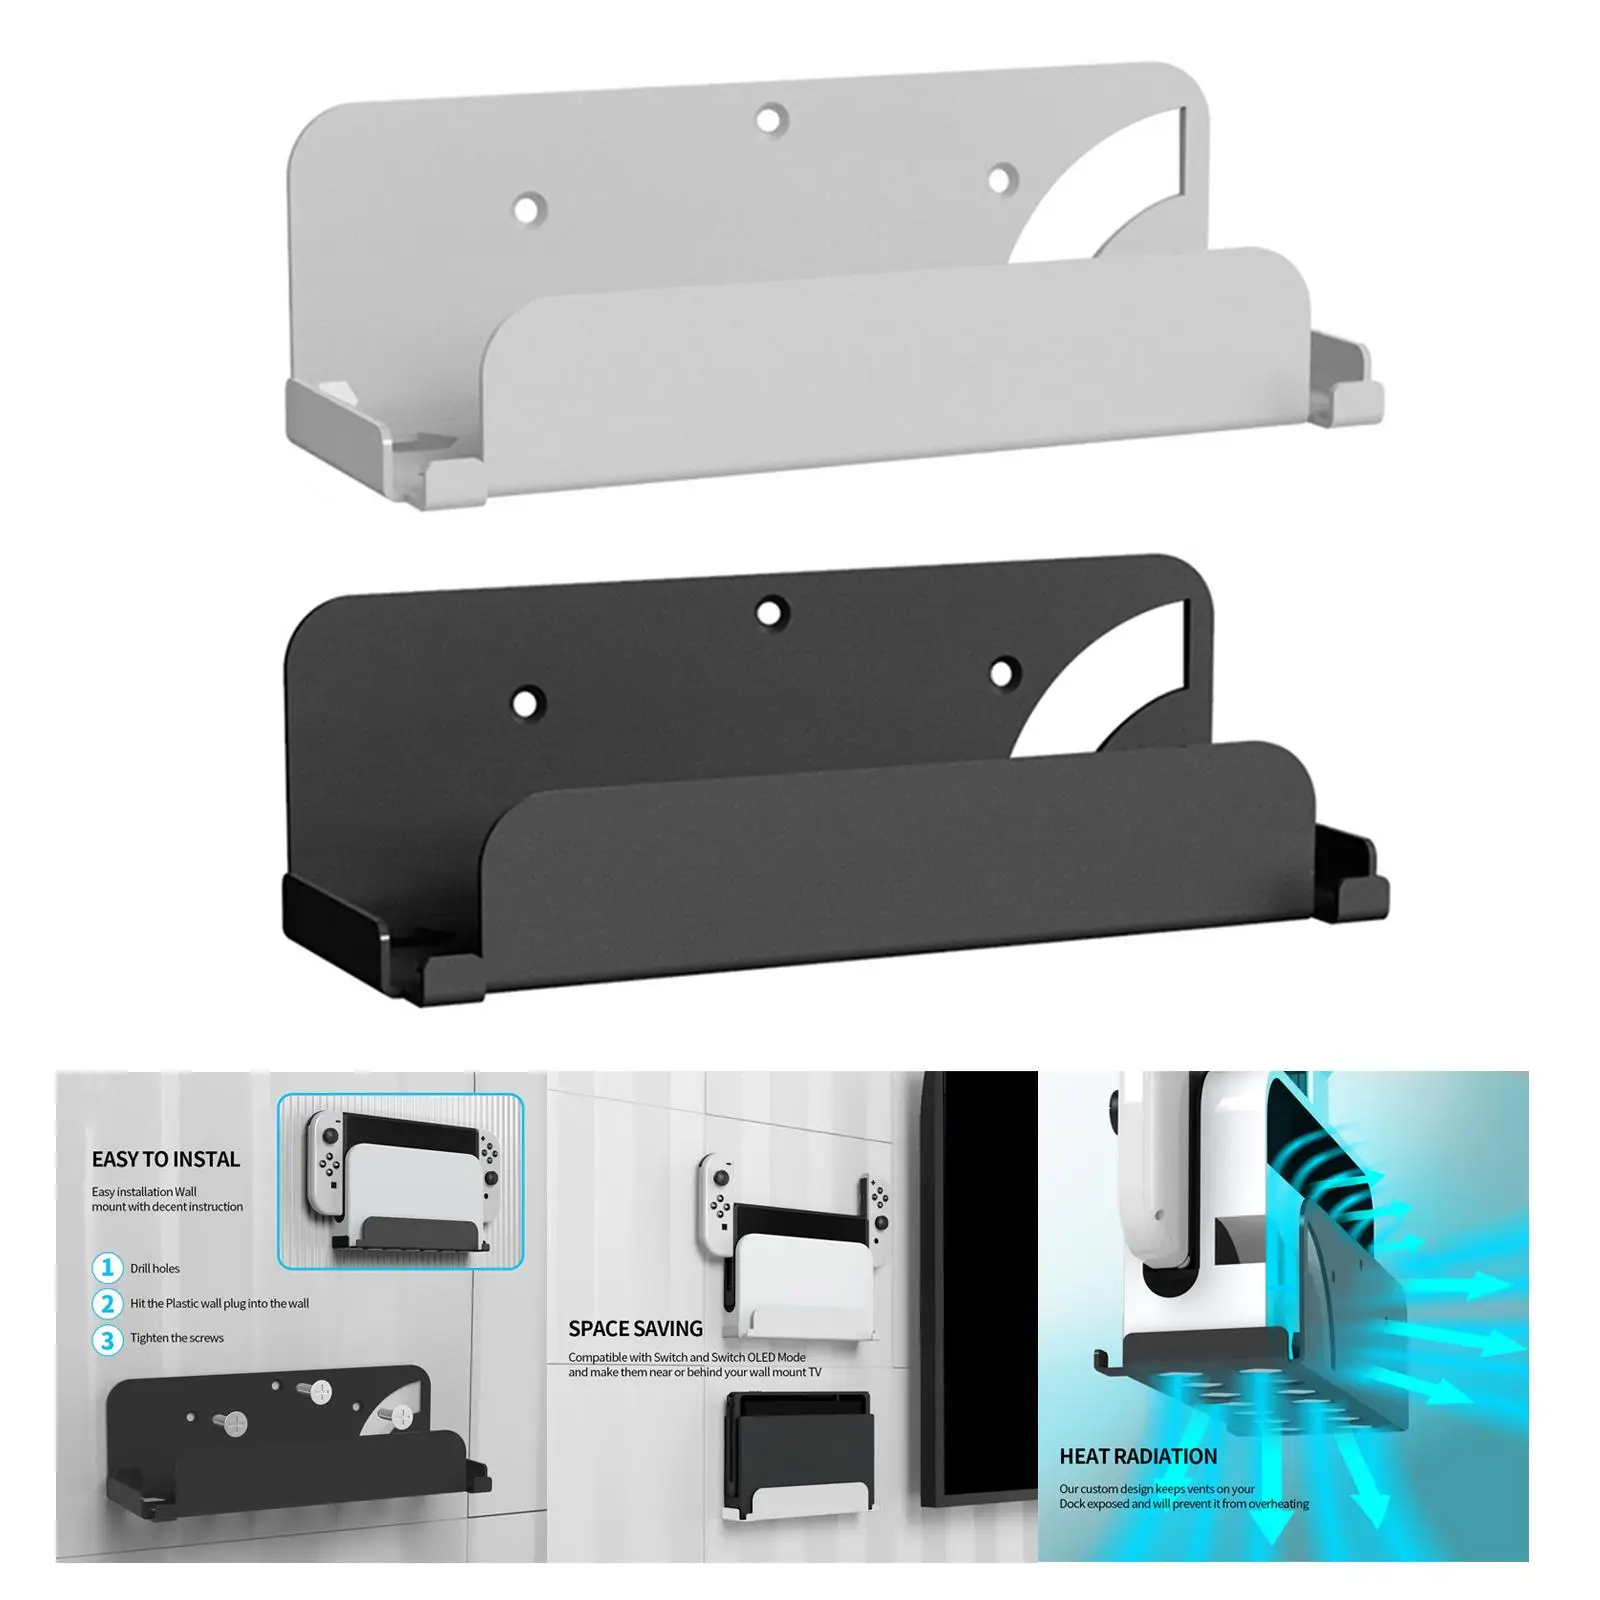 Household Game Console Wall Mounted Holder Bracket Wall Shelf Durable for Entryway Office Storage Rack Mobile Phone Game Console